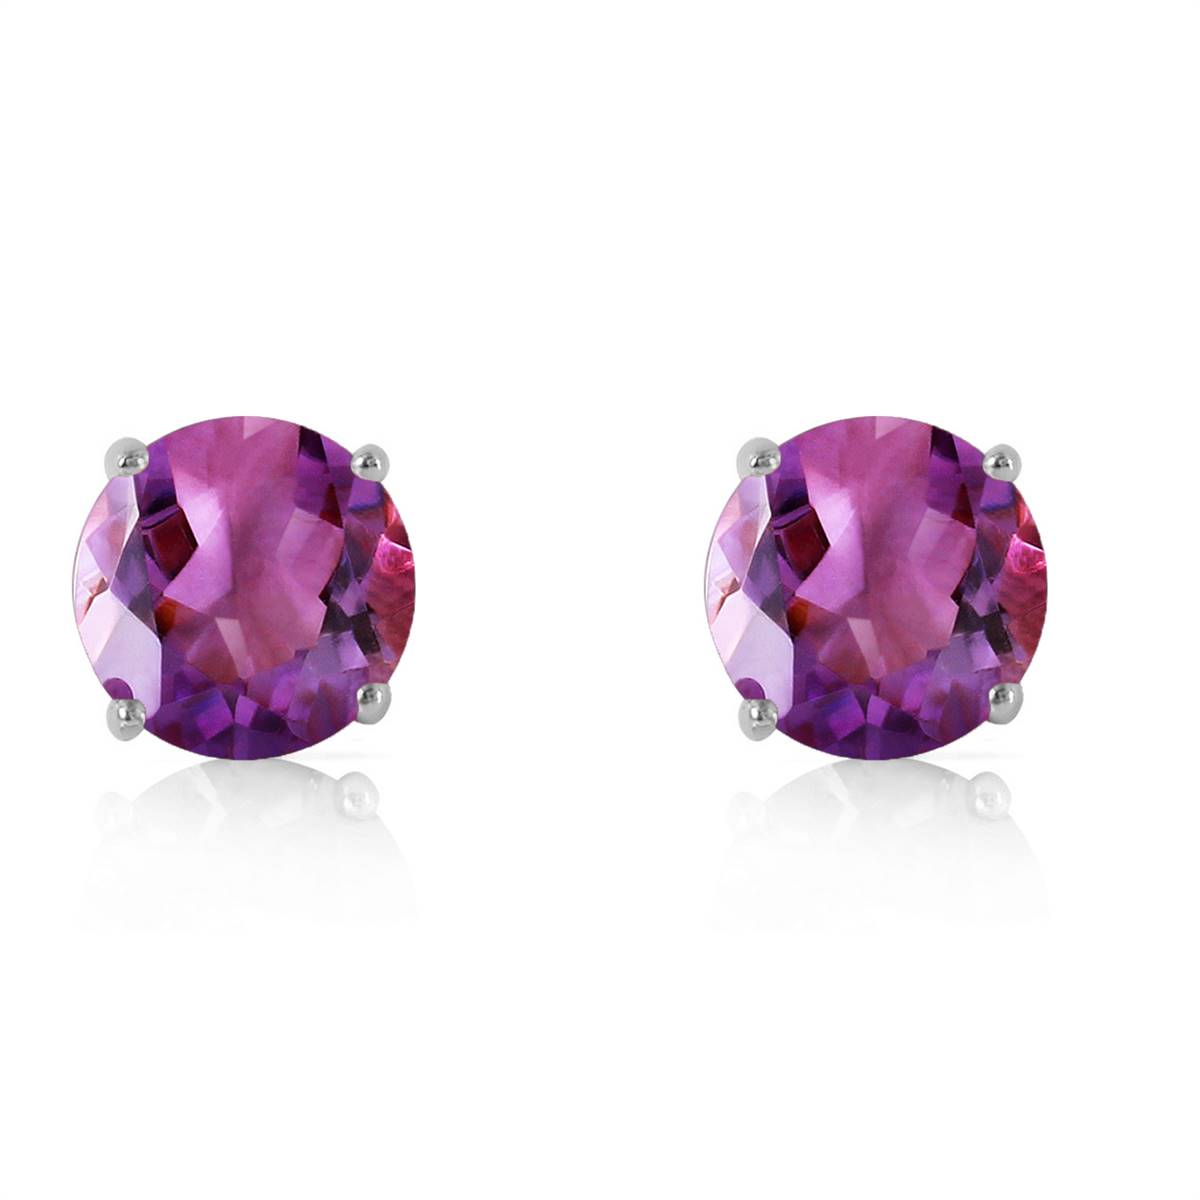 3.1 Carat 14K Solid White Gold Embrace Radiance Amethyst Earrings